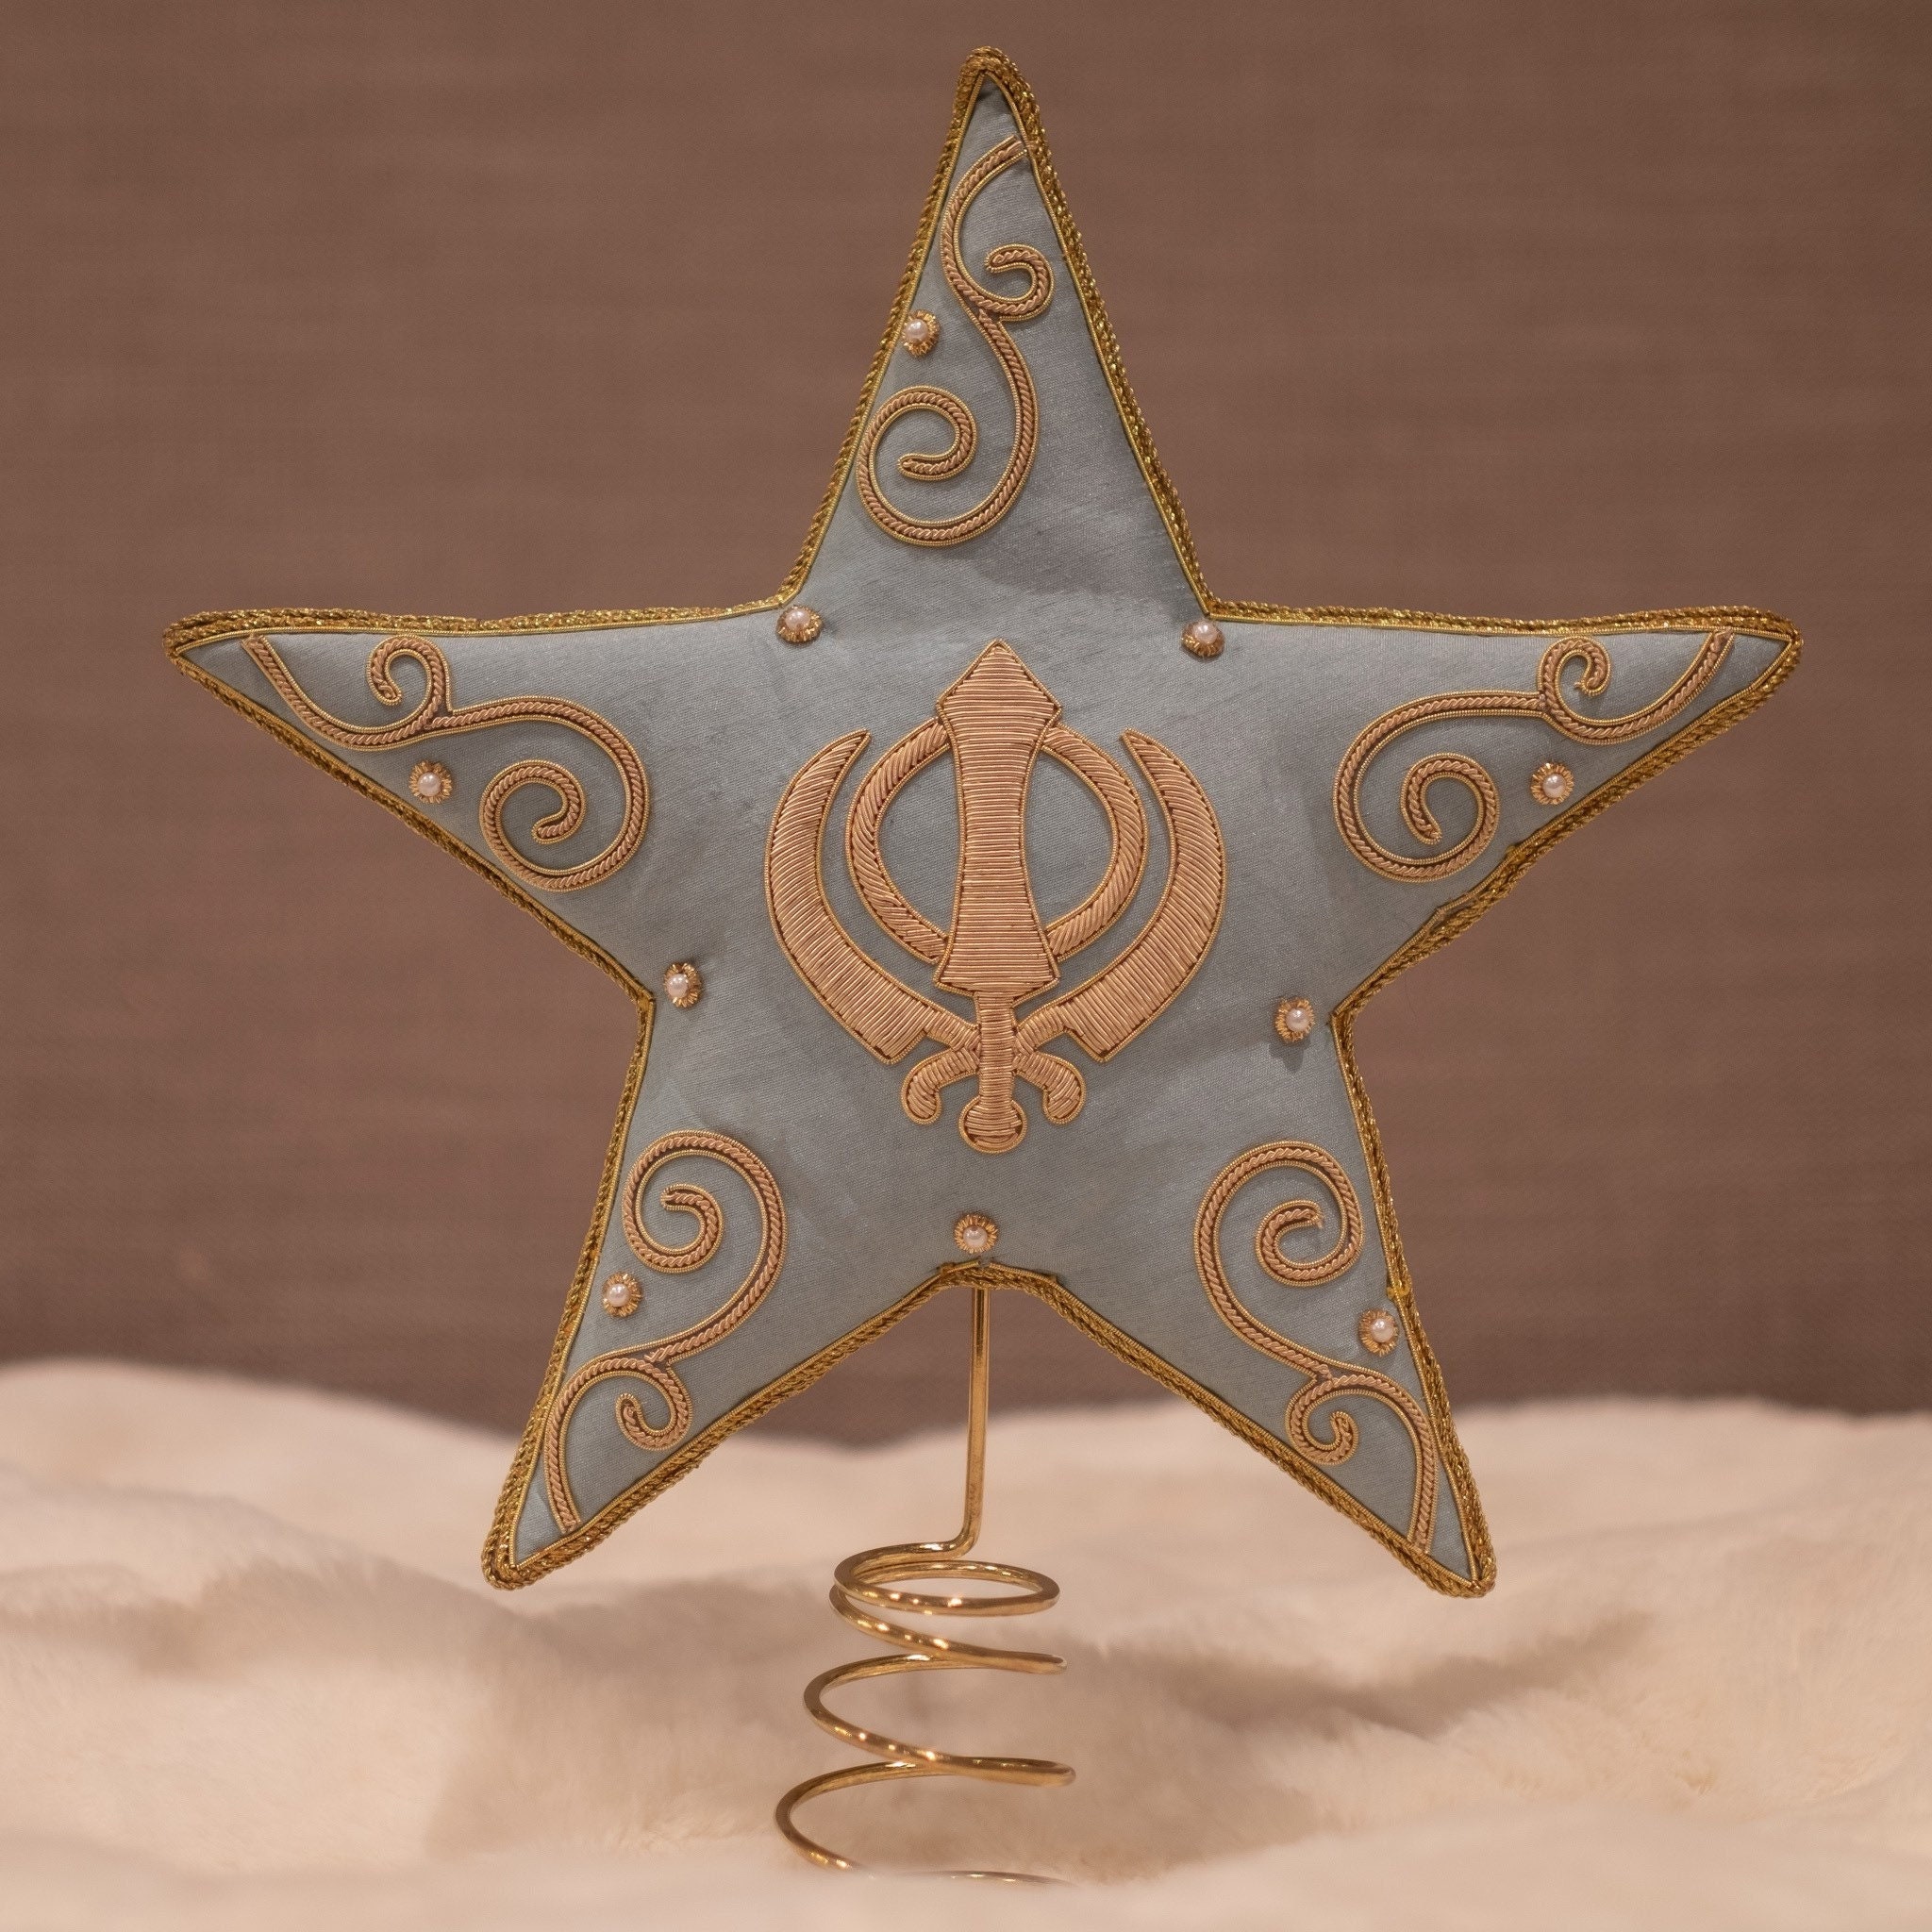 Embellished Felt Wool Holiday Tree Topper - Light the Way